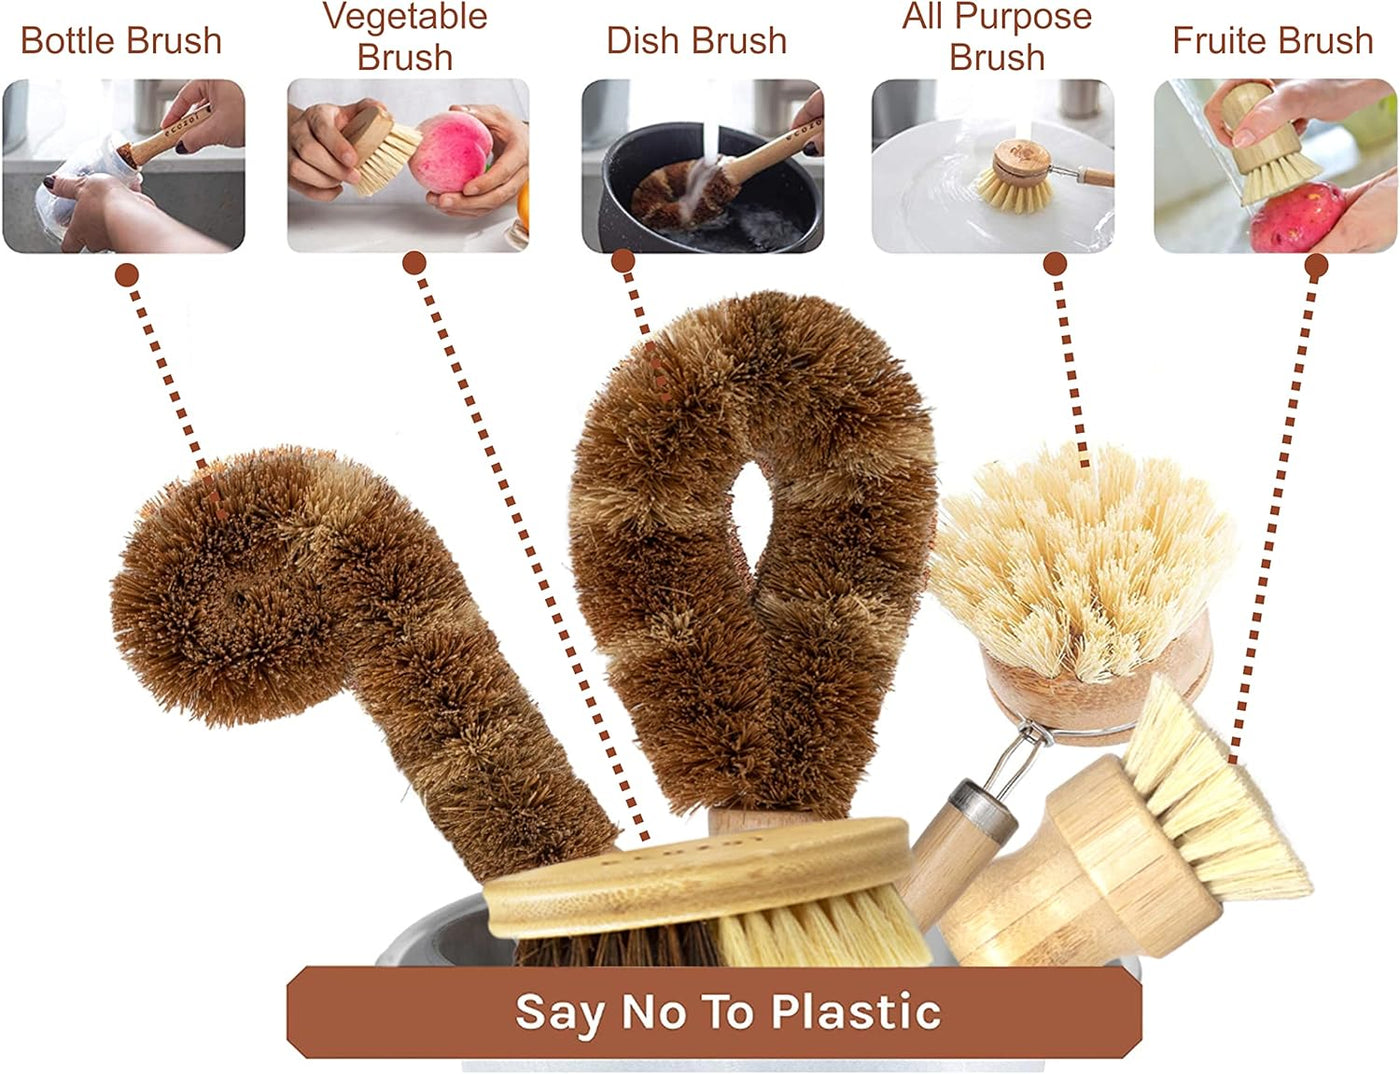 Ecomended Coconut Kitchen Brushes - exist green